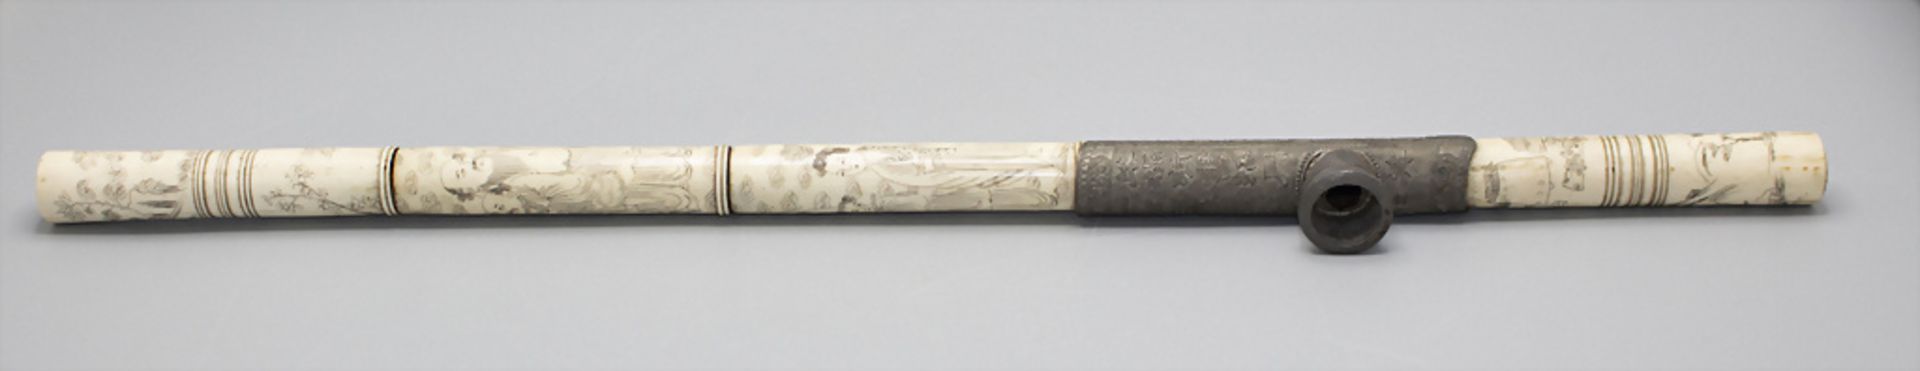 Opiumpfeife / An opium pipe, China, wohl 19. Jh. - Image 2 of 5